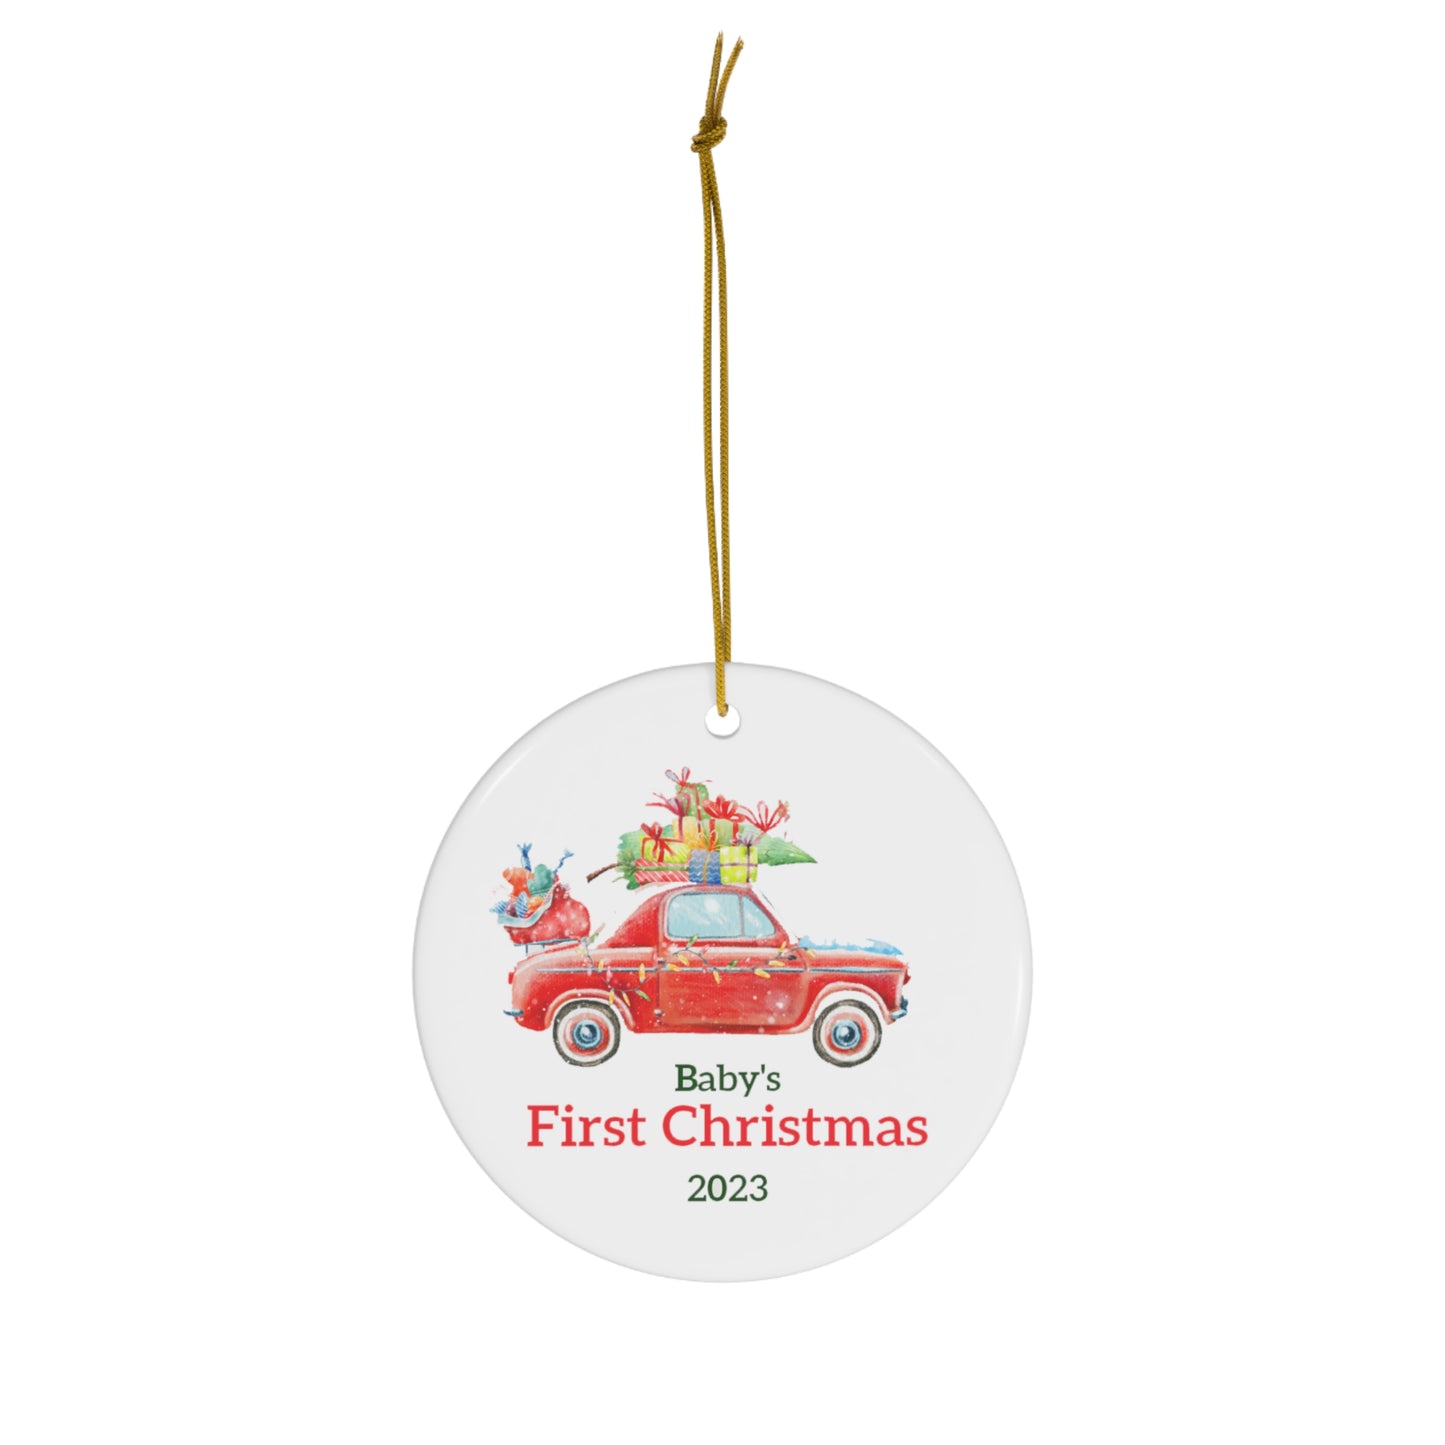 Baby's First Christmas Ceramic Ornament